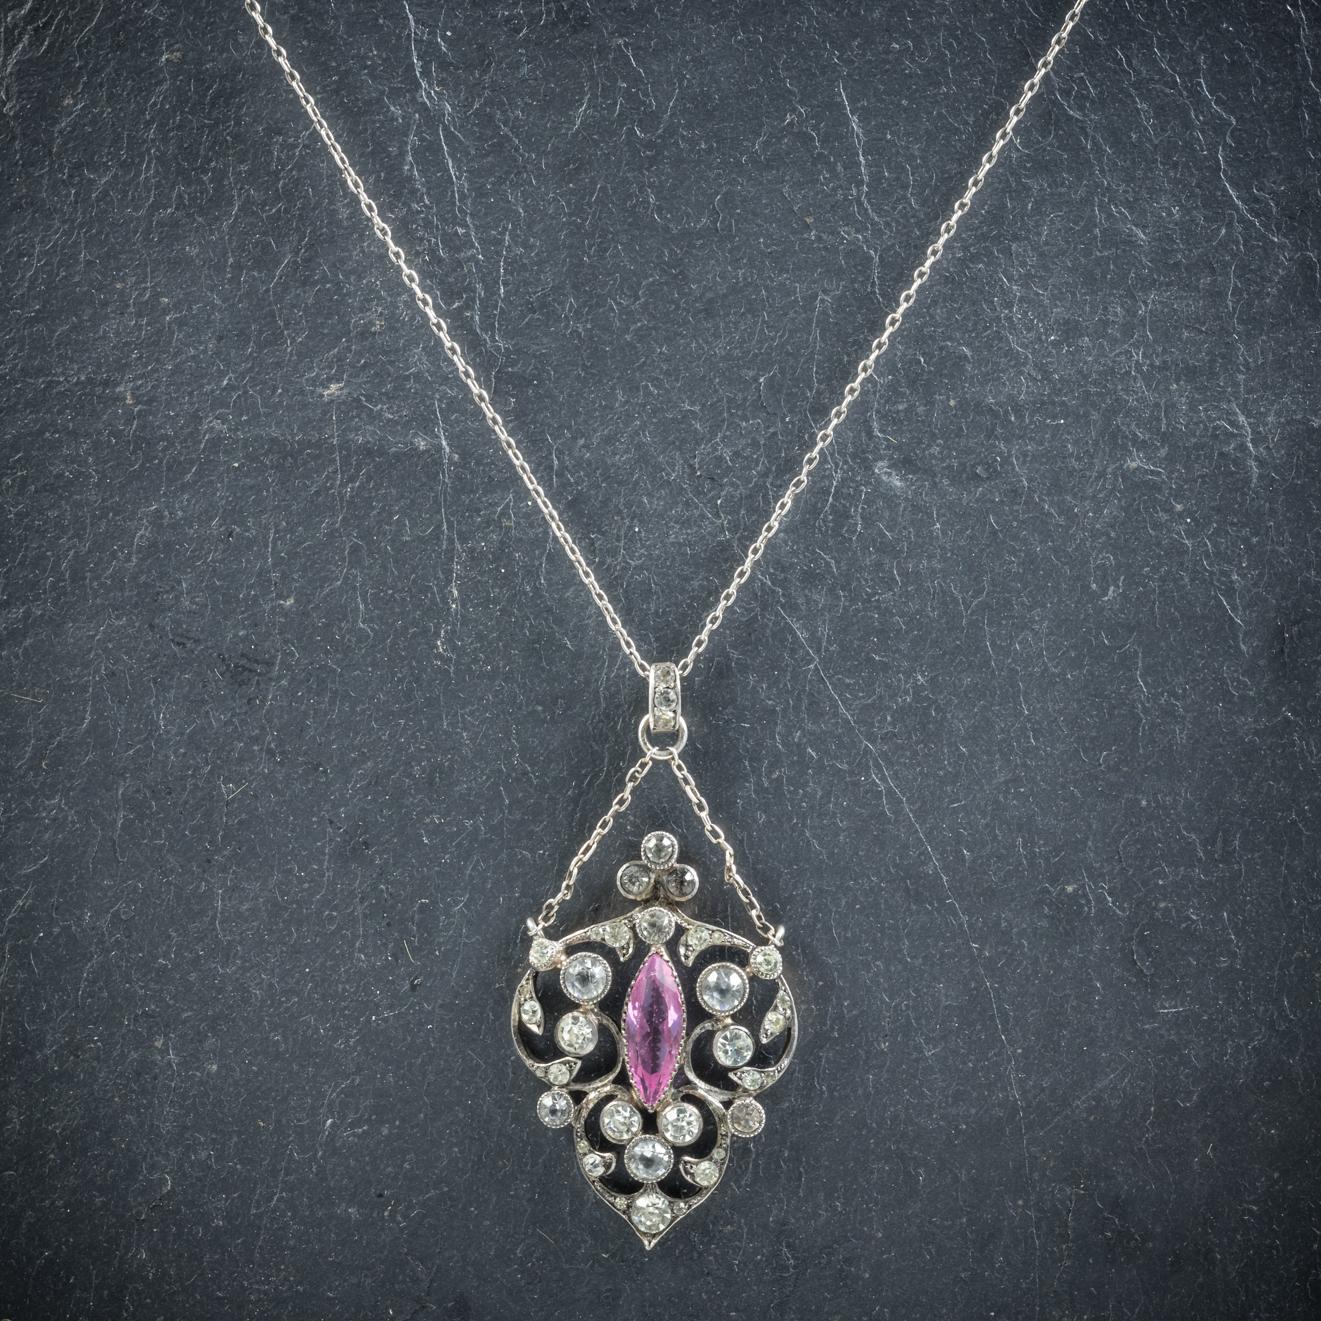 This fabulous antique Paste pendant and chain is Edwardian, Circa 1915

Set with a lovely marquise cut pink Paste stone in the centre and white Paste stones chasing around the gallery

The Silver chain leads to a lower festoon that connects to the